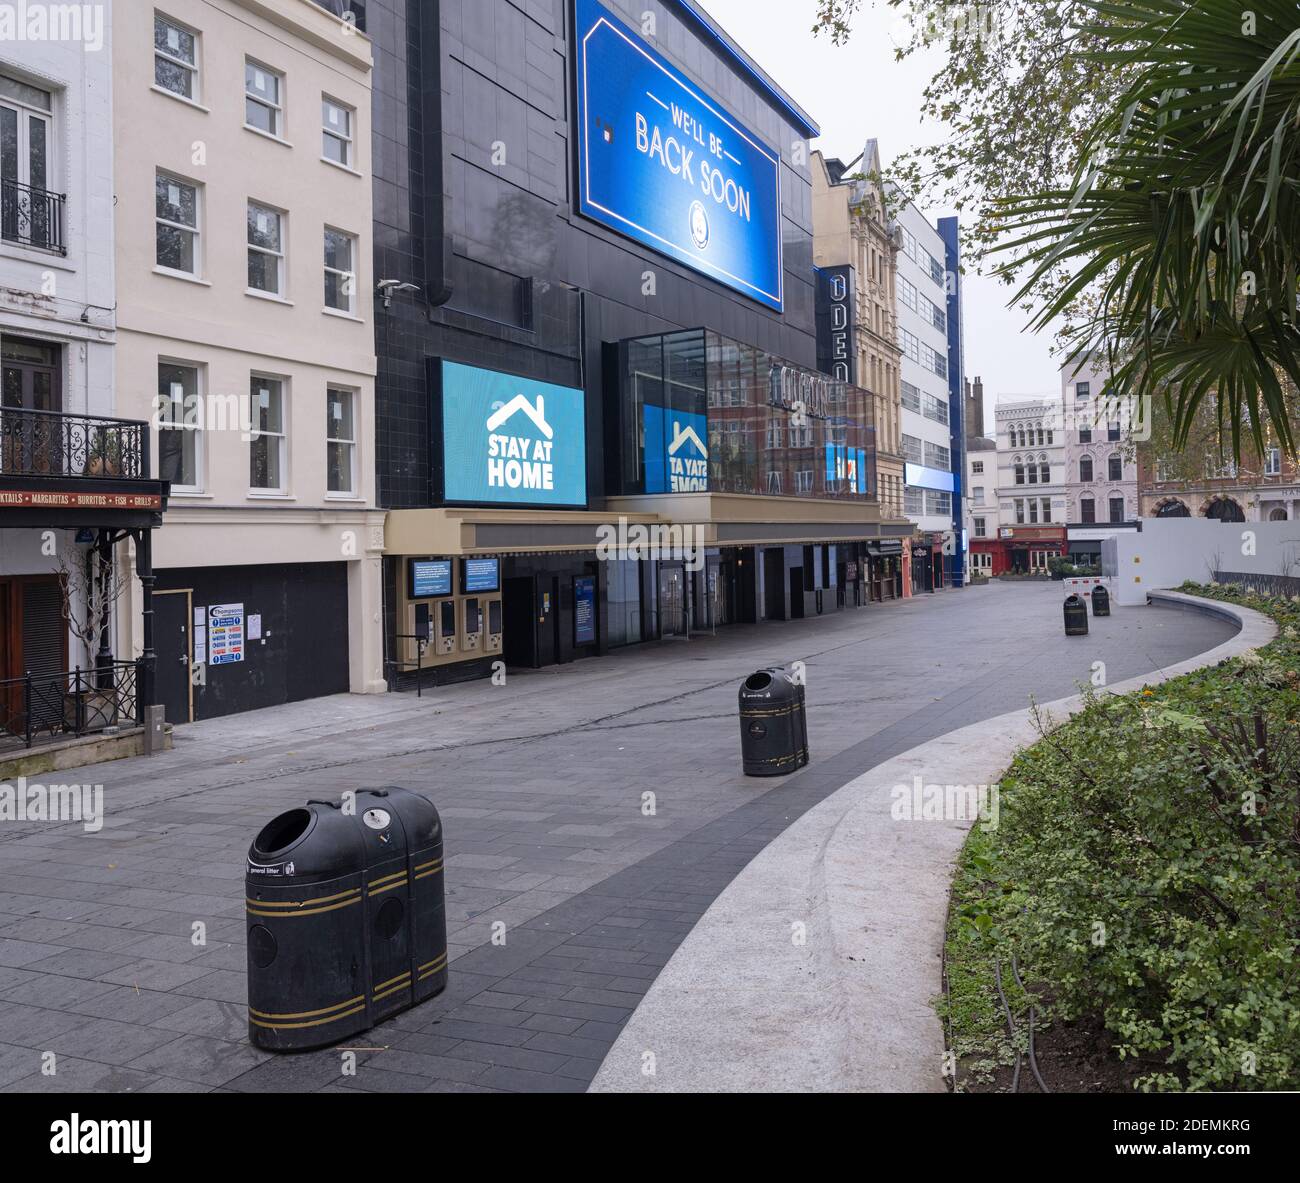 GREAT BRITAIN / England / London / Lights up blue with appeals to Stay at home sign at the Odeon Cinema in Leicester Square . Stock Photo